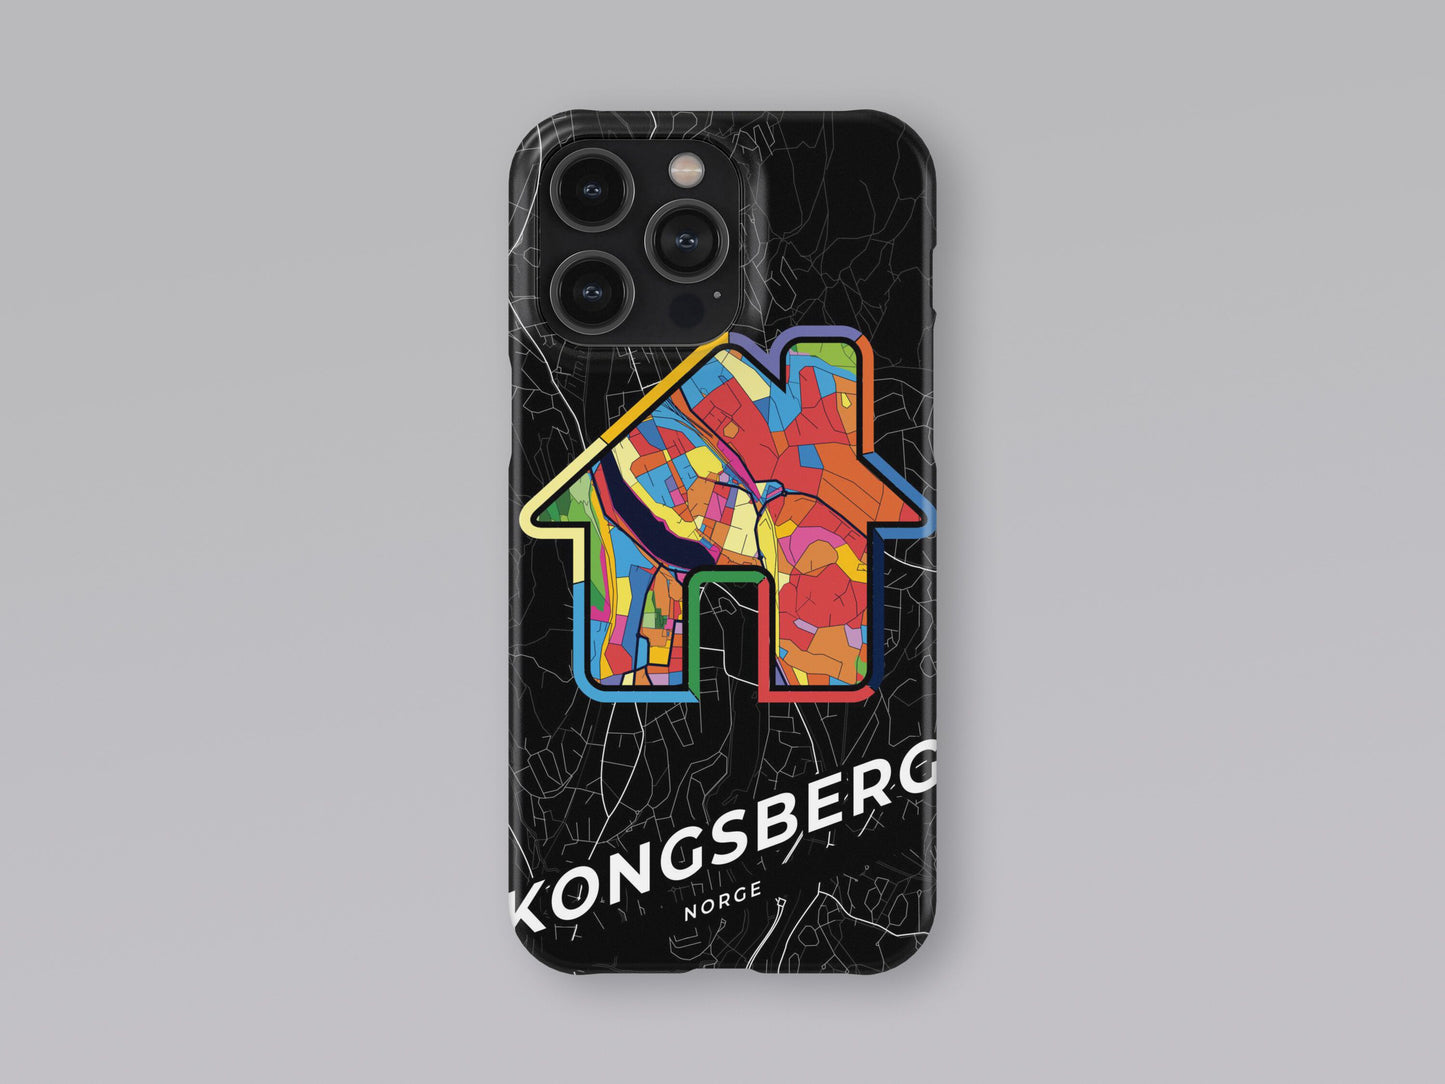 Kongsberg Norway slim phone case with colorful icon. Birthday, wedding or housewarming gift. Couple match cases. 3